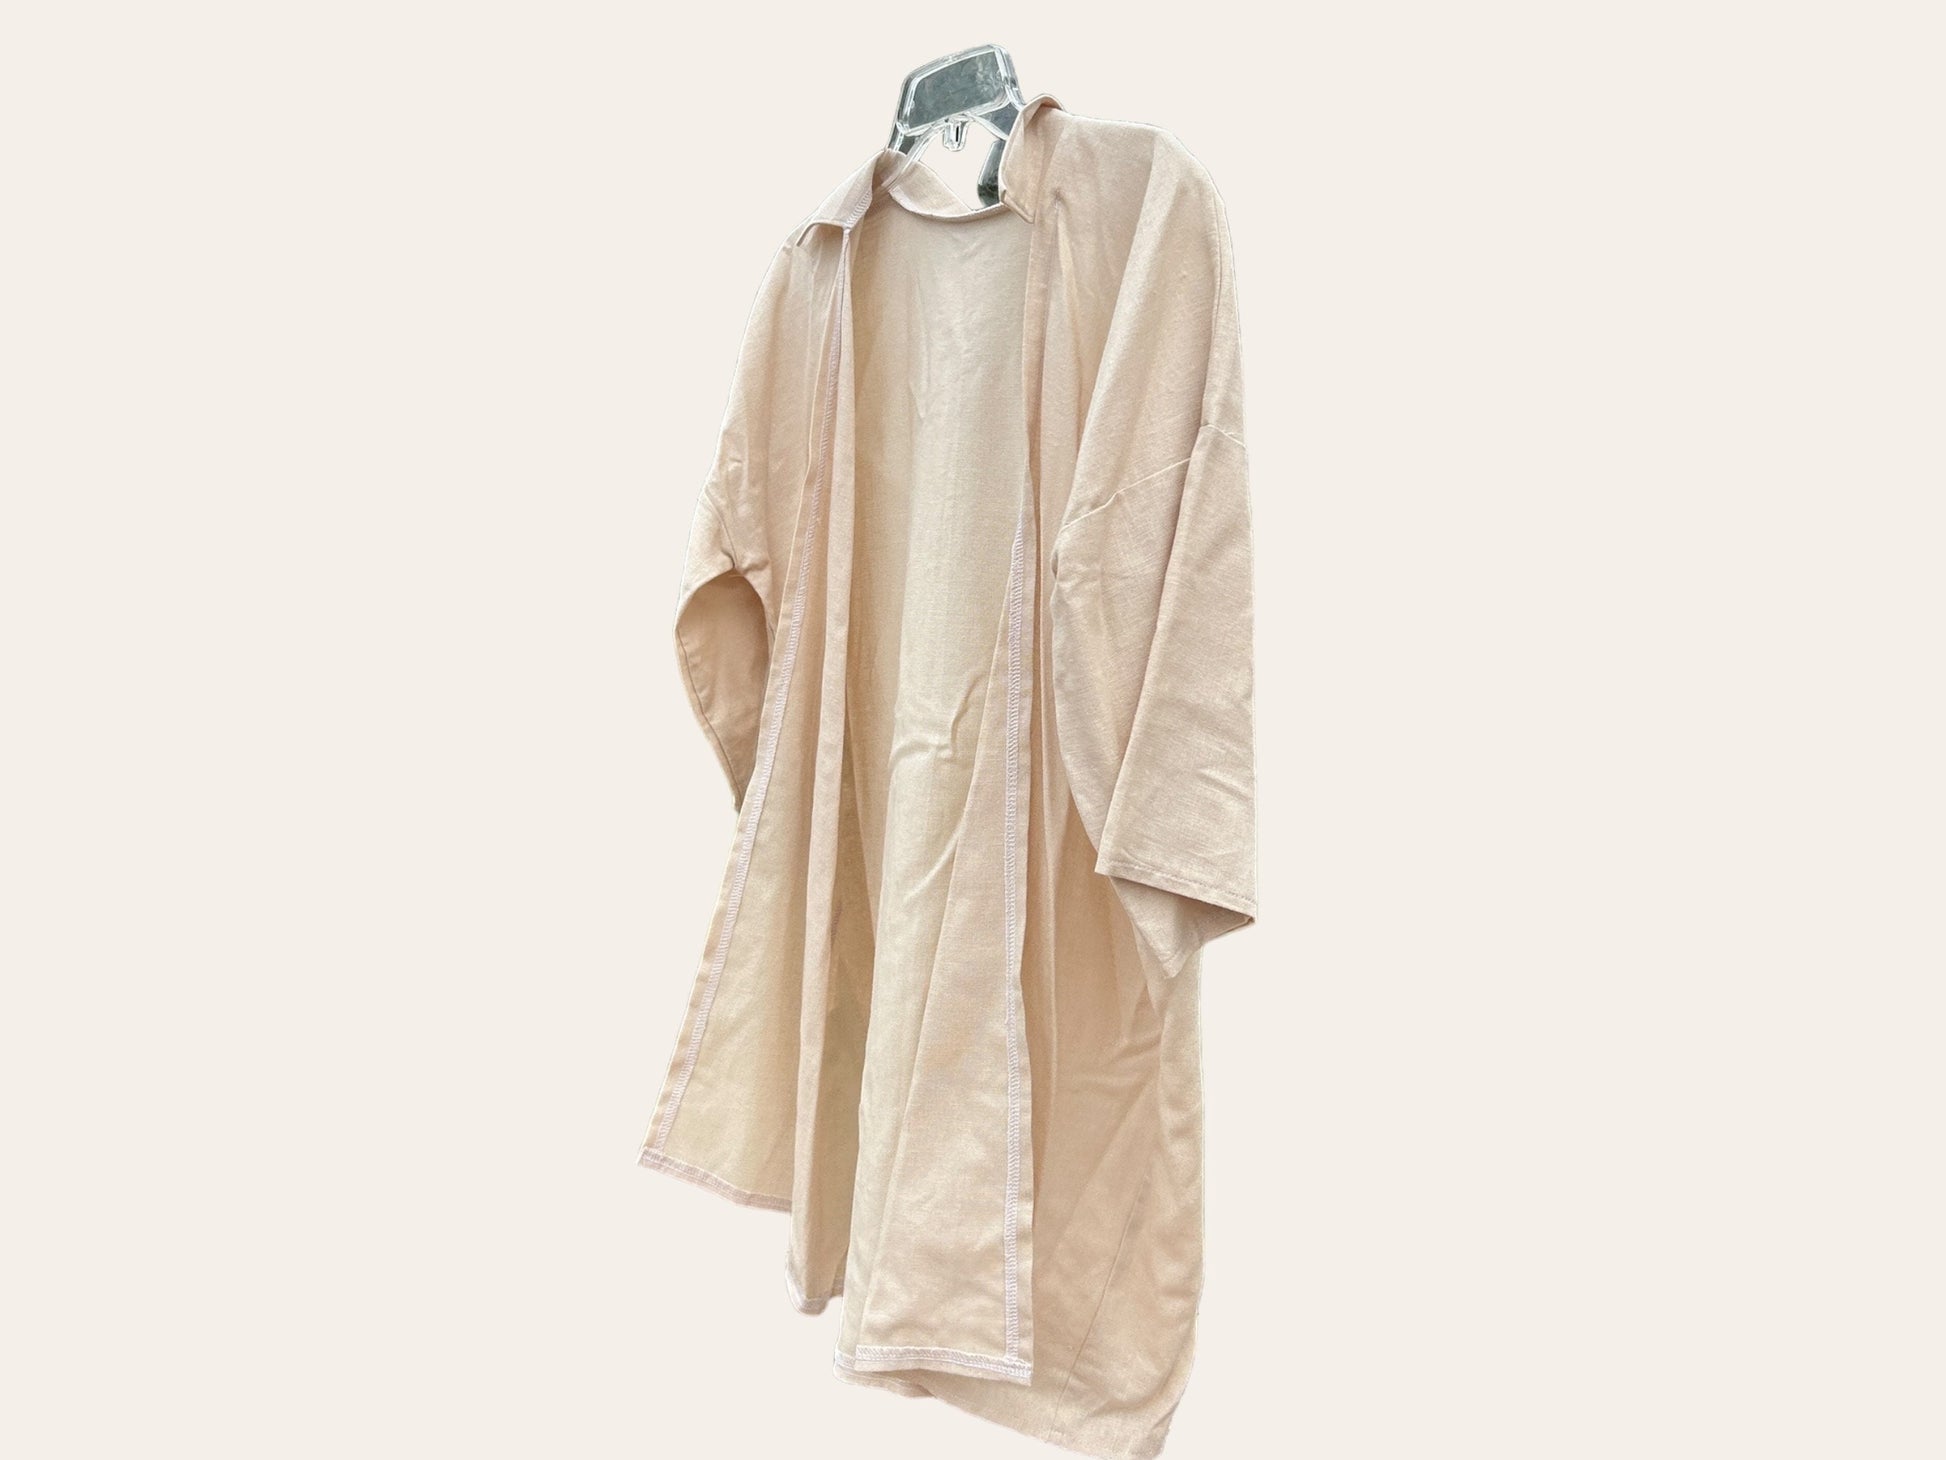 Linen Coverup Top - Arly